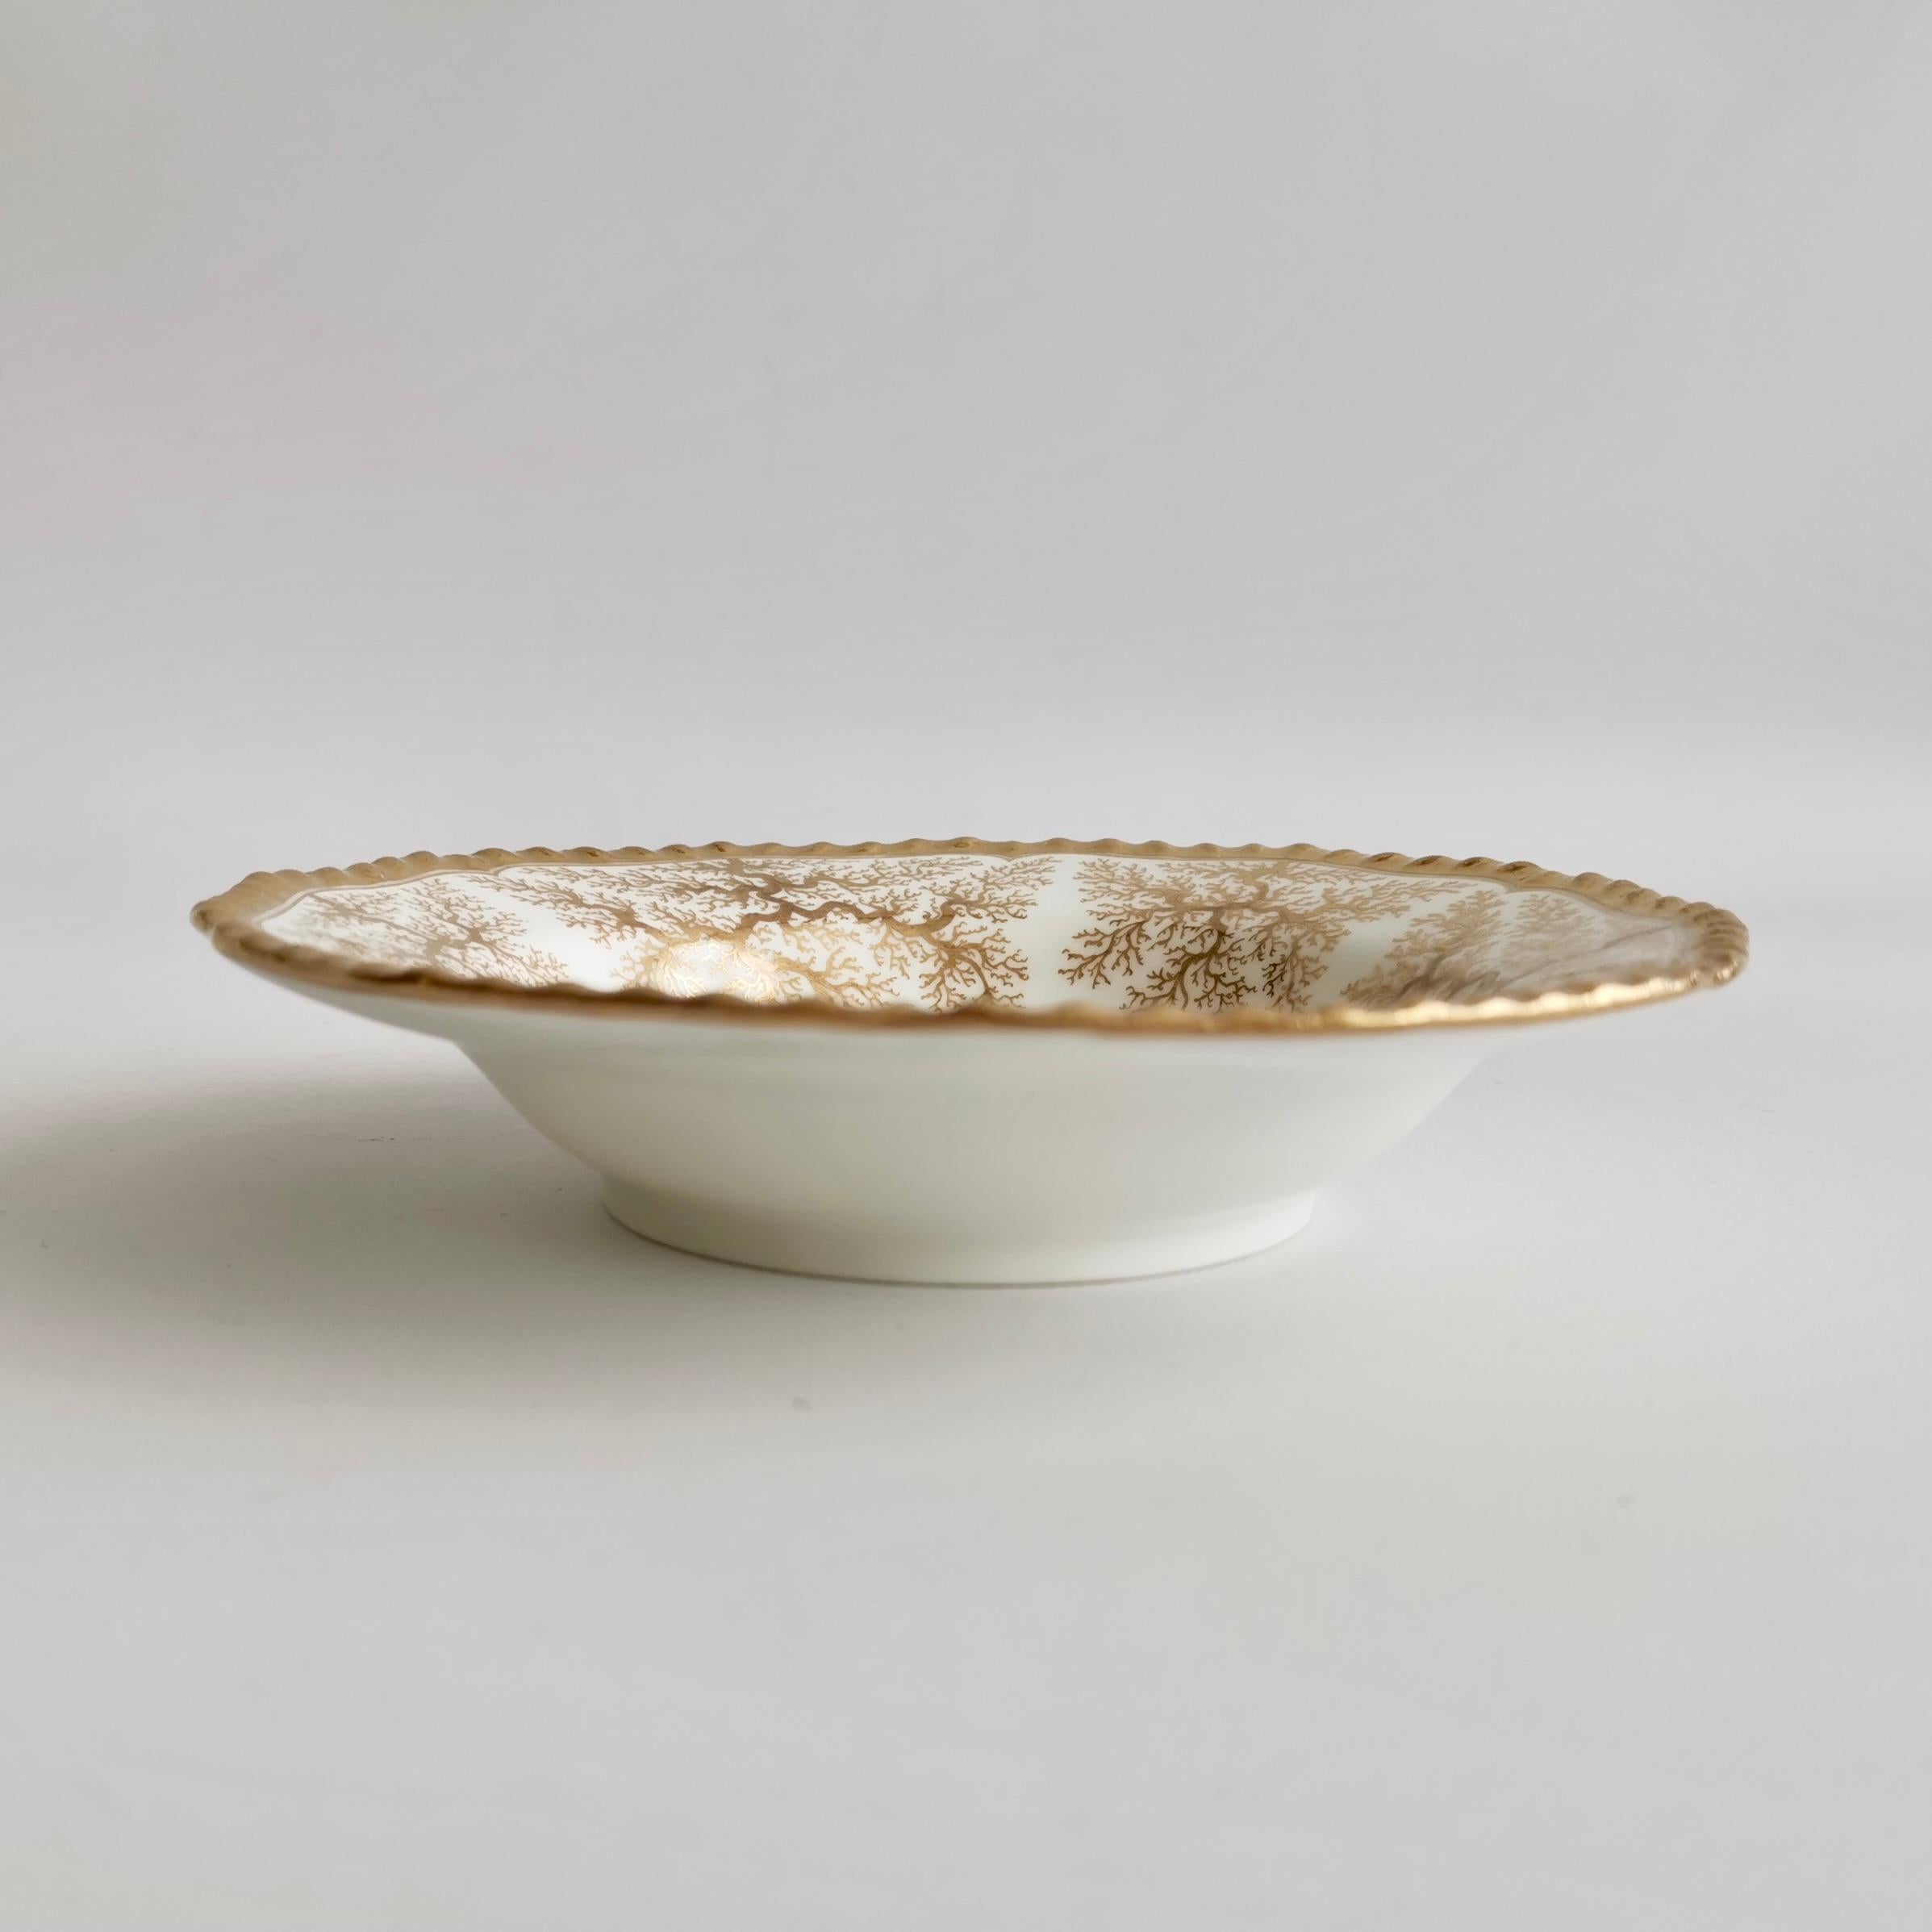 Early 19th Century Flight Barr and Barr Small Porcelain Bowl, Gilt Seaweed, Regency 1816-1820